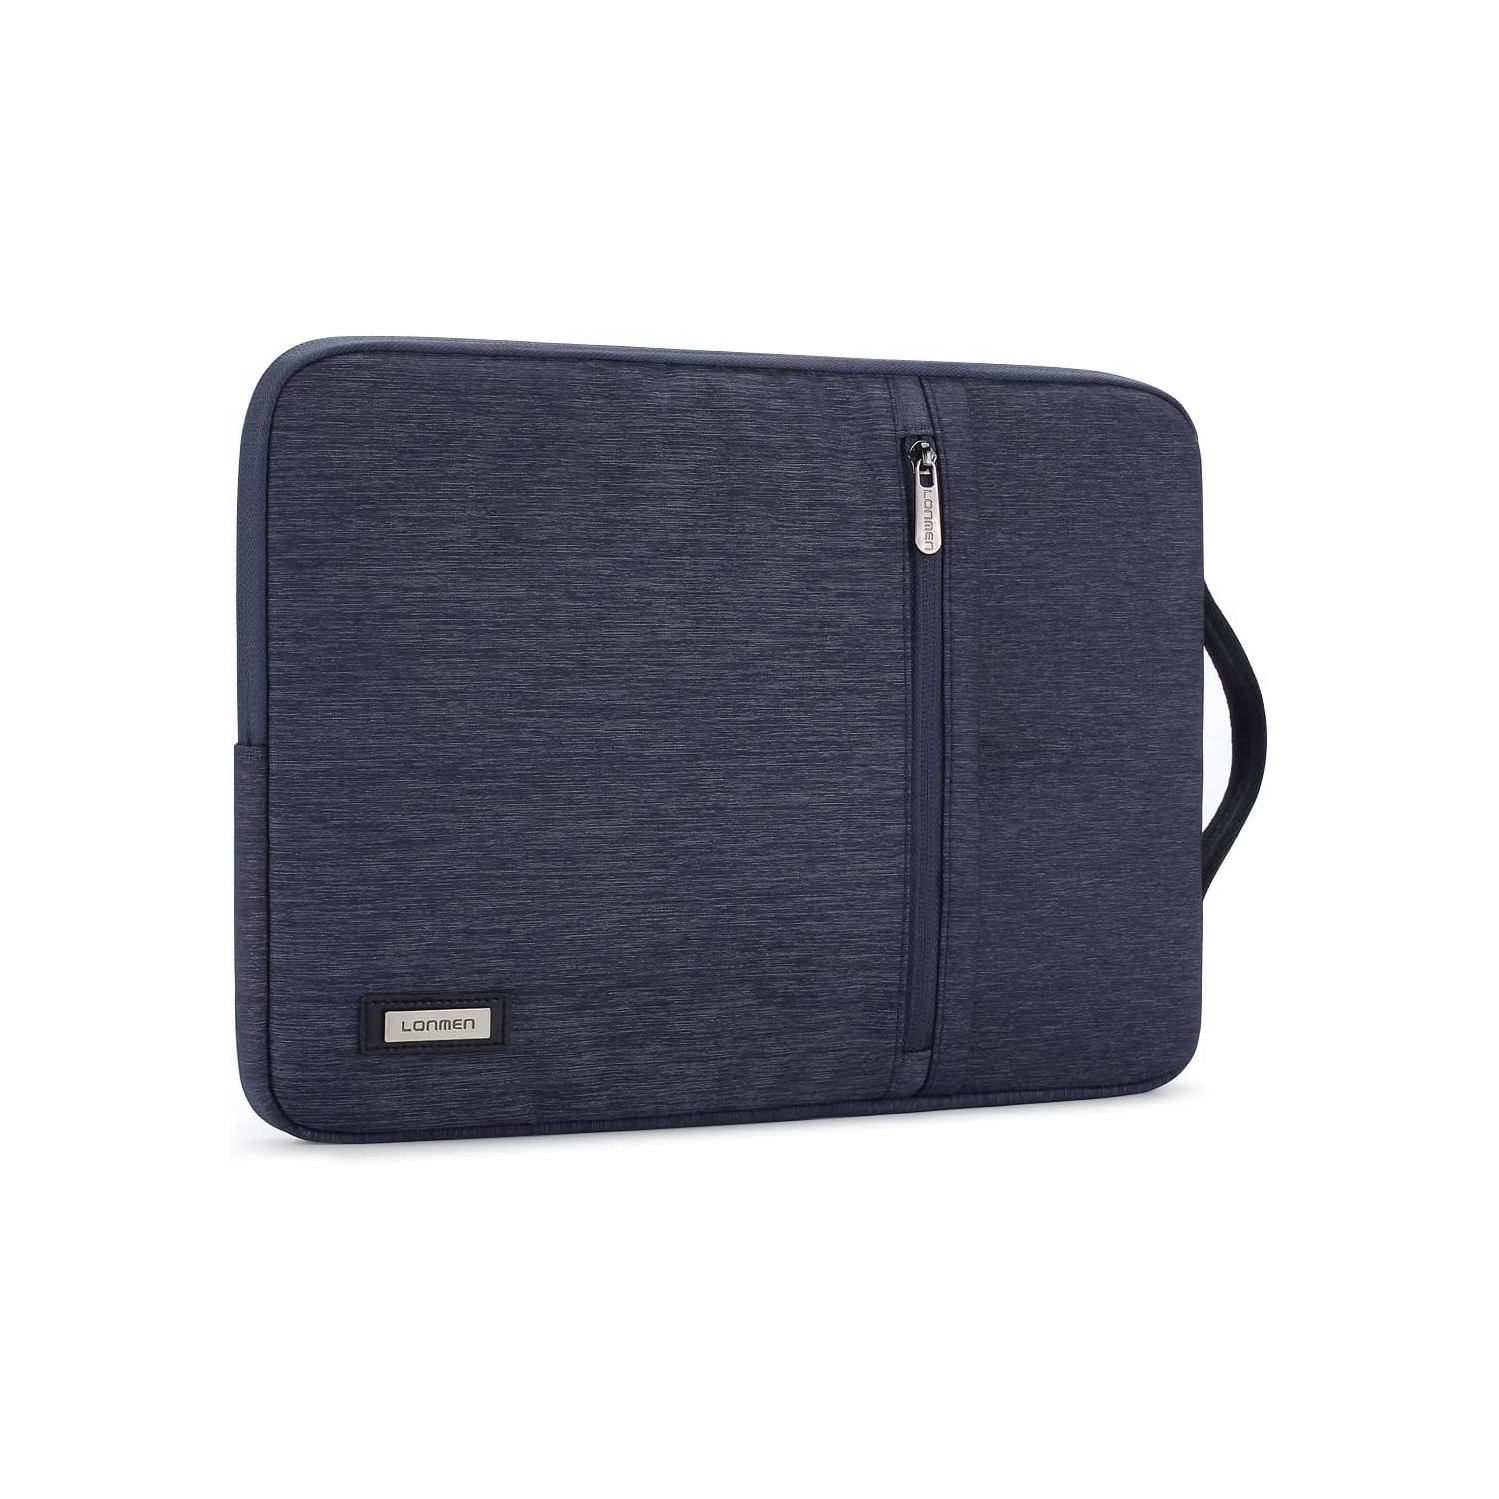 10.1 Inch Laptop Sleeve Case Water-Resistant Tablet Protective Carrying Handle Bag for 10.5" iPad Pro/9.7" iPad